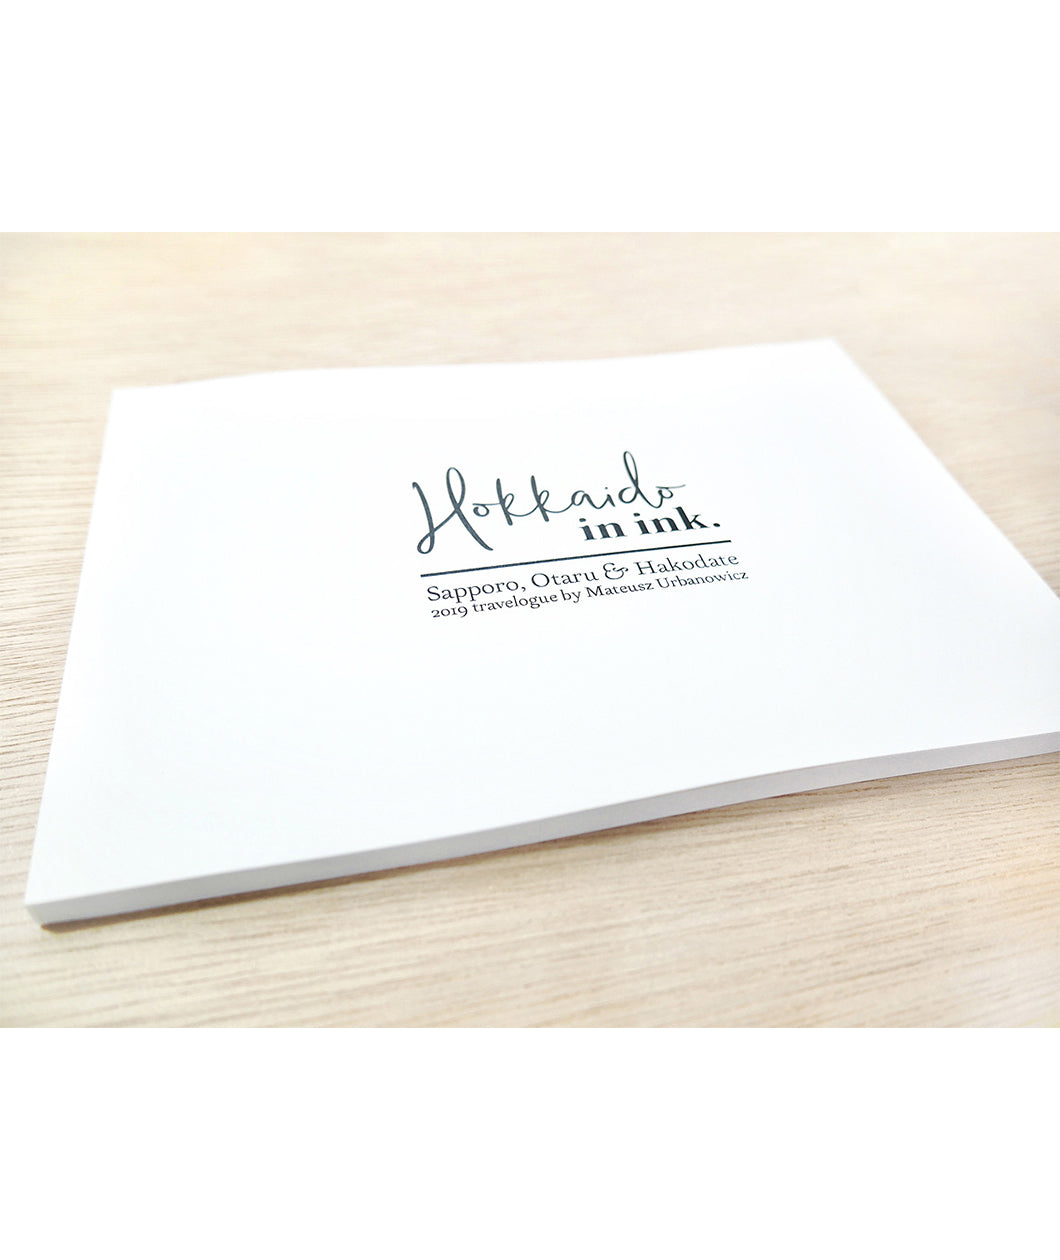 A flat, thin, white book with the words "Hokkaido in ink." above "Sopporo, Otaru & Hakodate 2019 travelogue by Mateusz Urbanowicz" in black writing. 